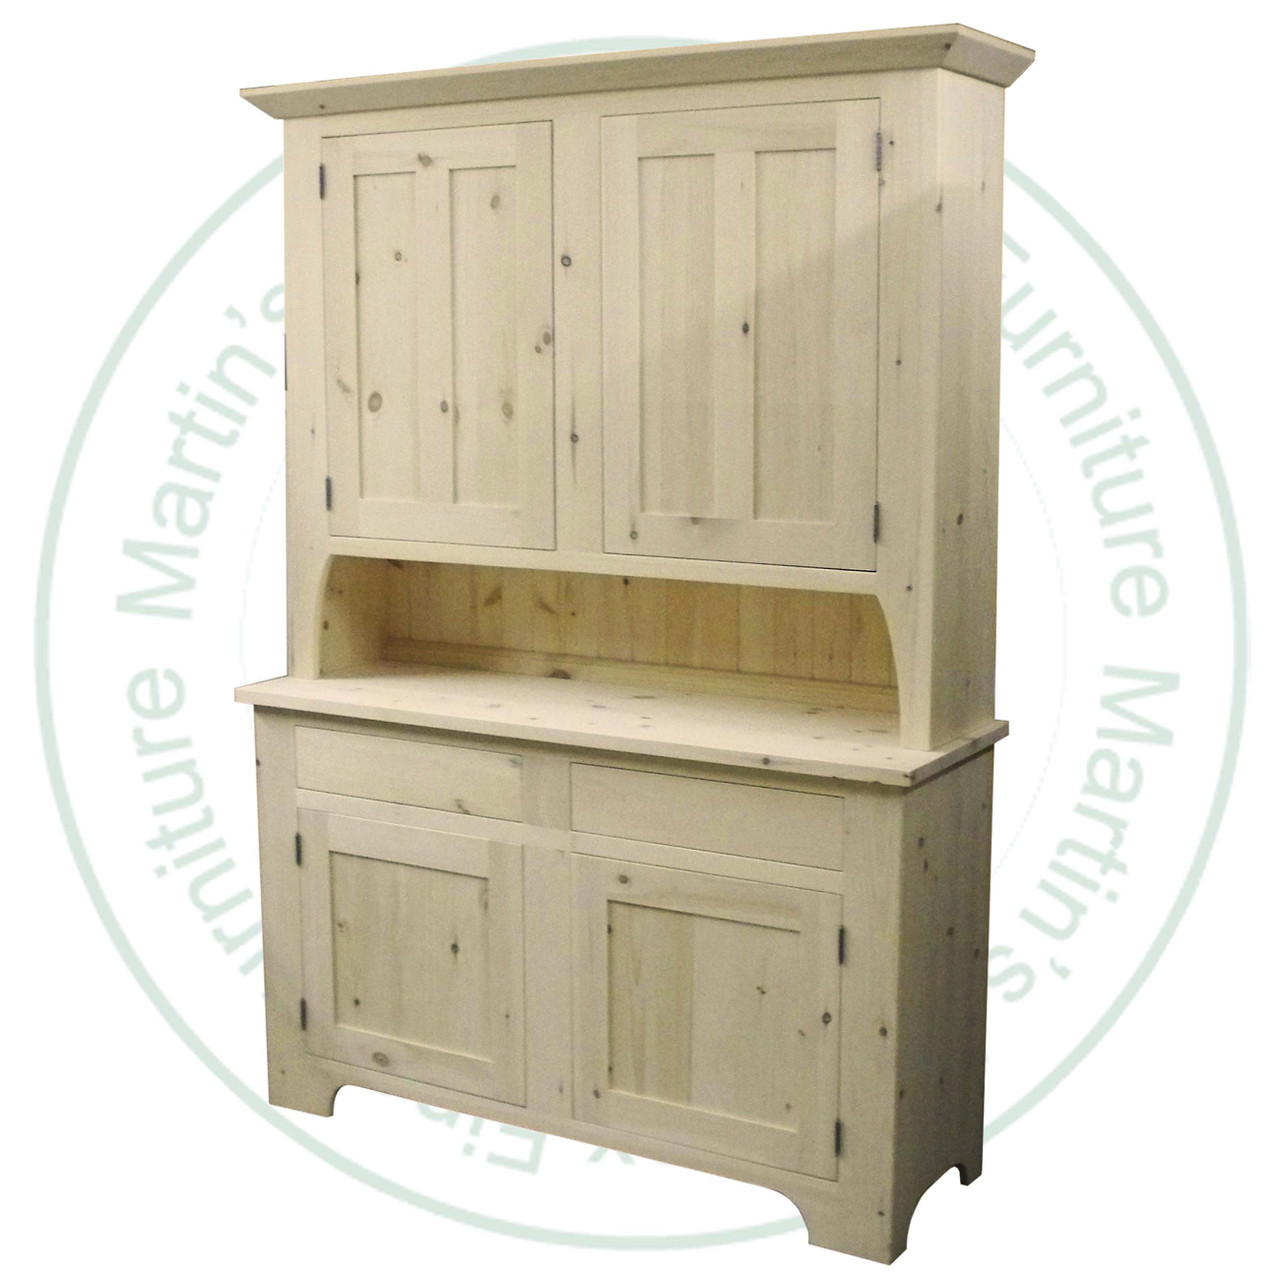 Maple Rustic Hutch And Buffet 56''W x 81''H x 19''D